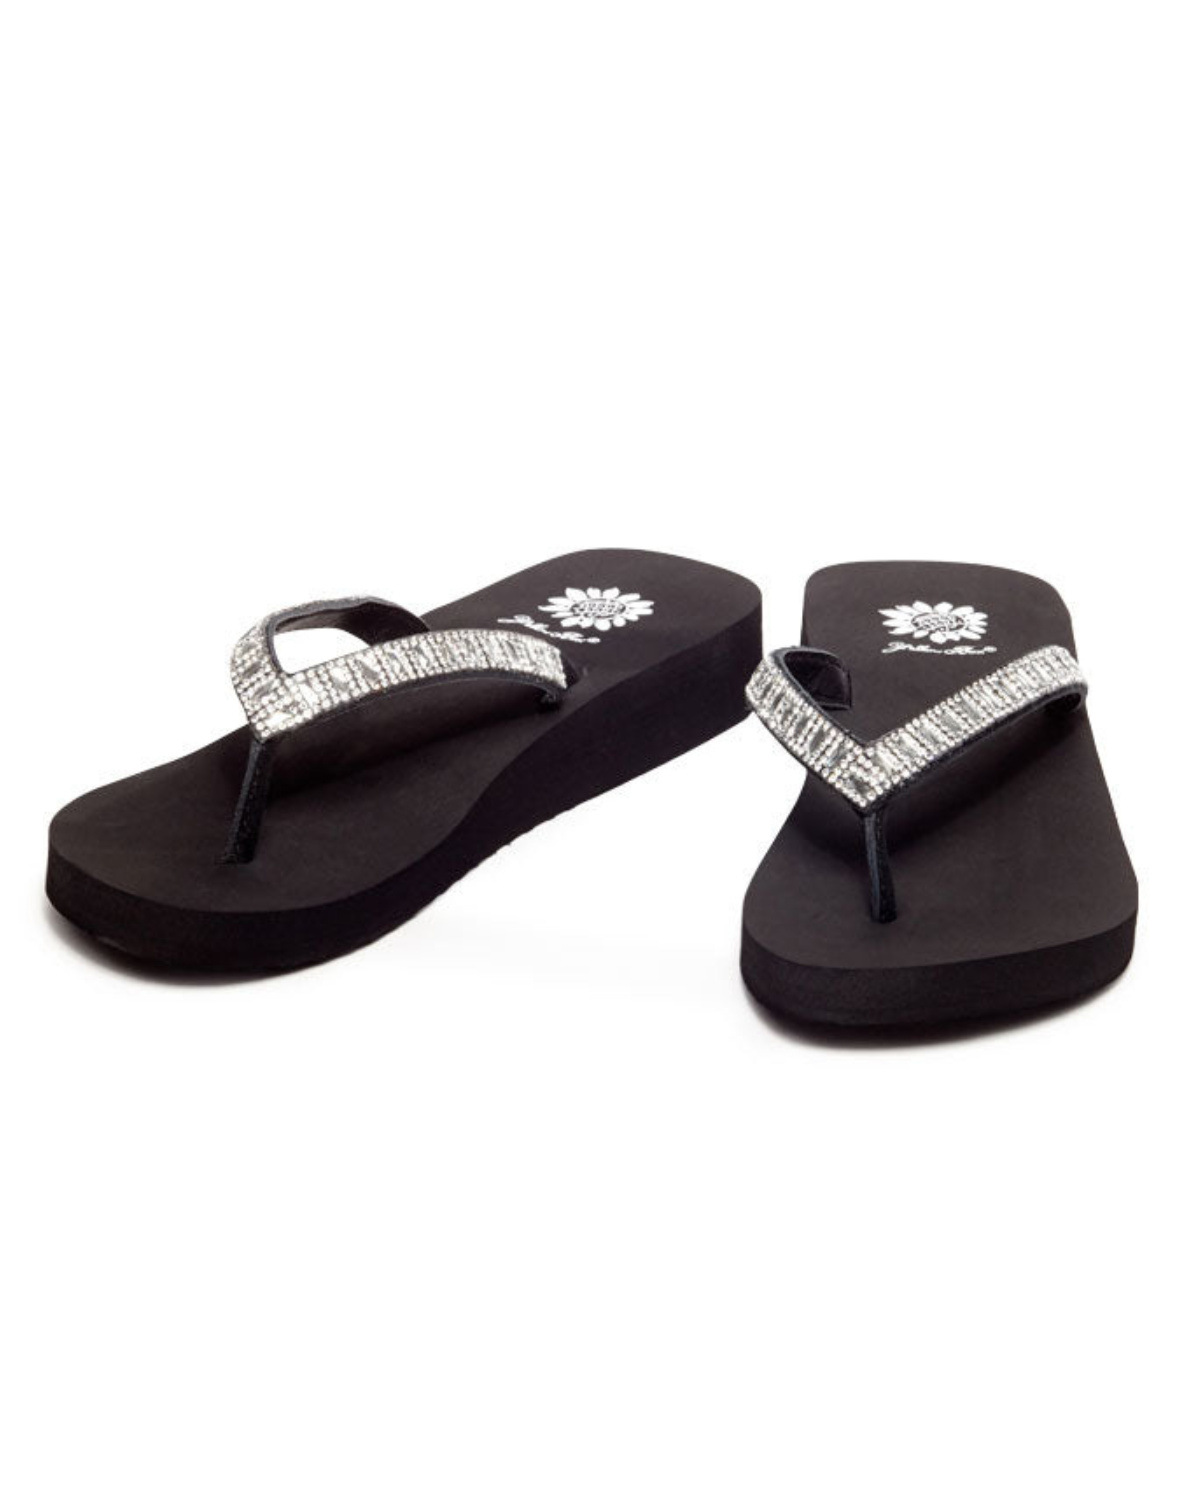 Women's black wedge sandal with rhinestones on the straps.